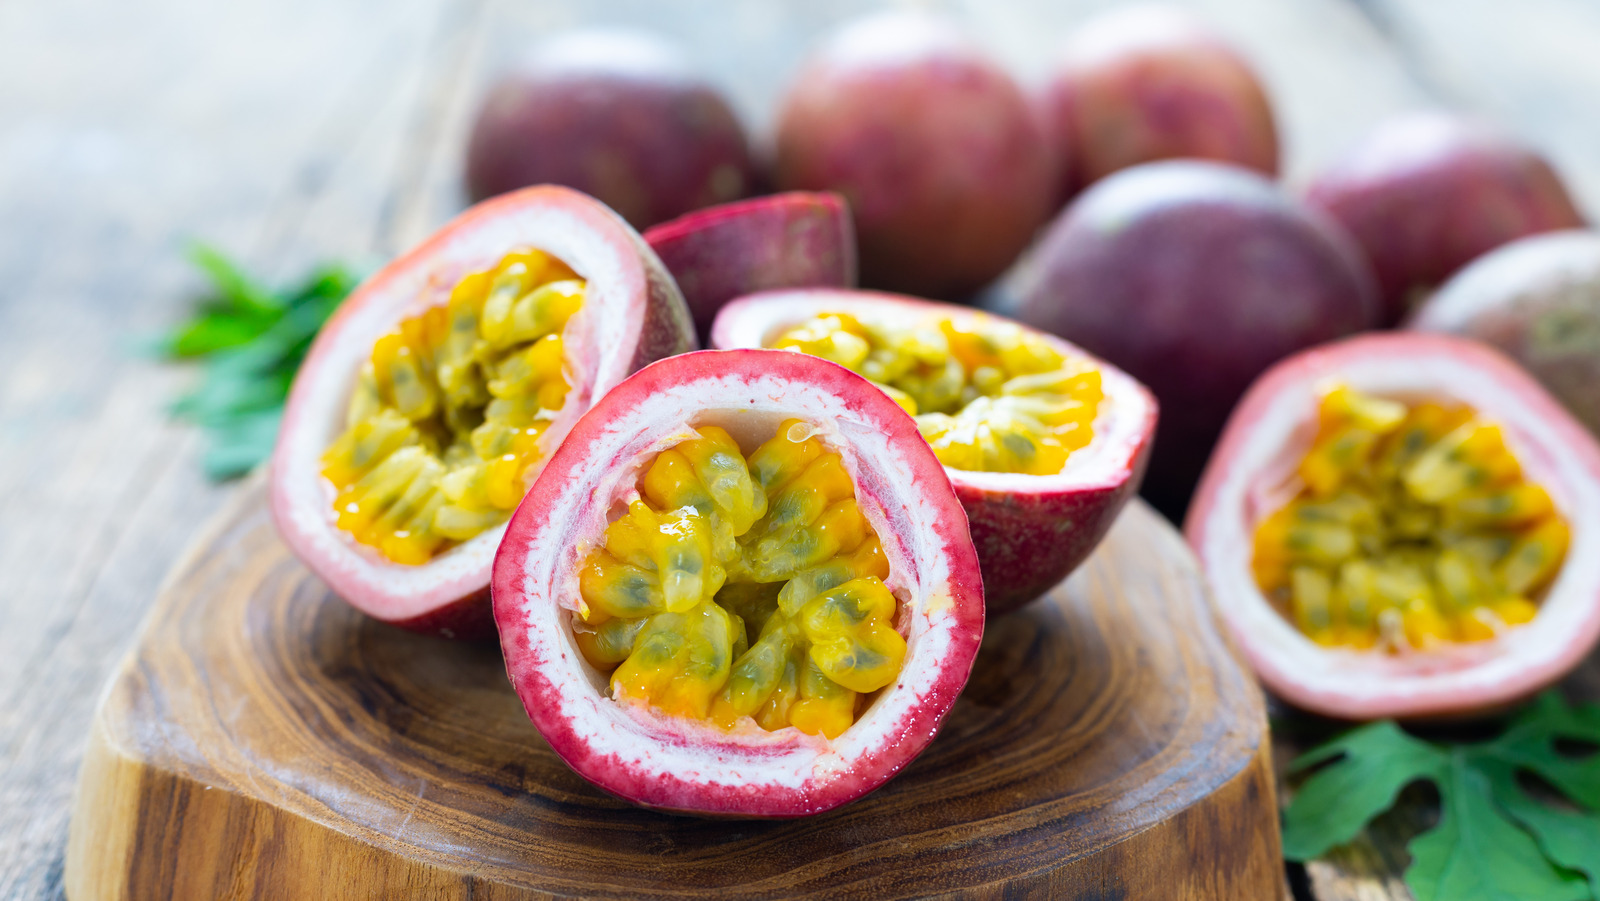 What Is Passion Fruit And How Do You Eat One?